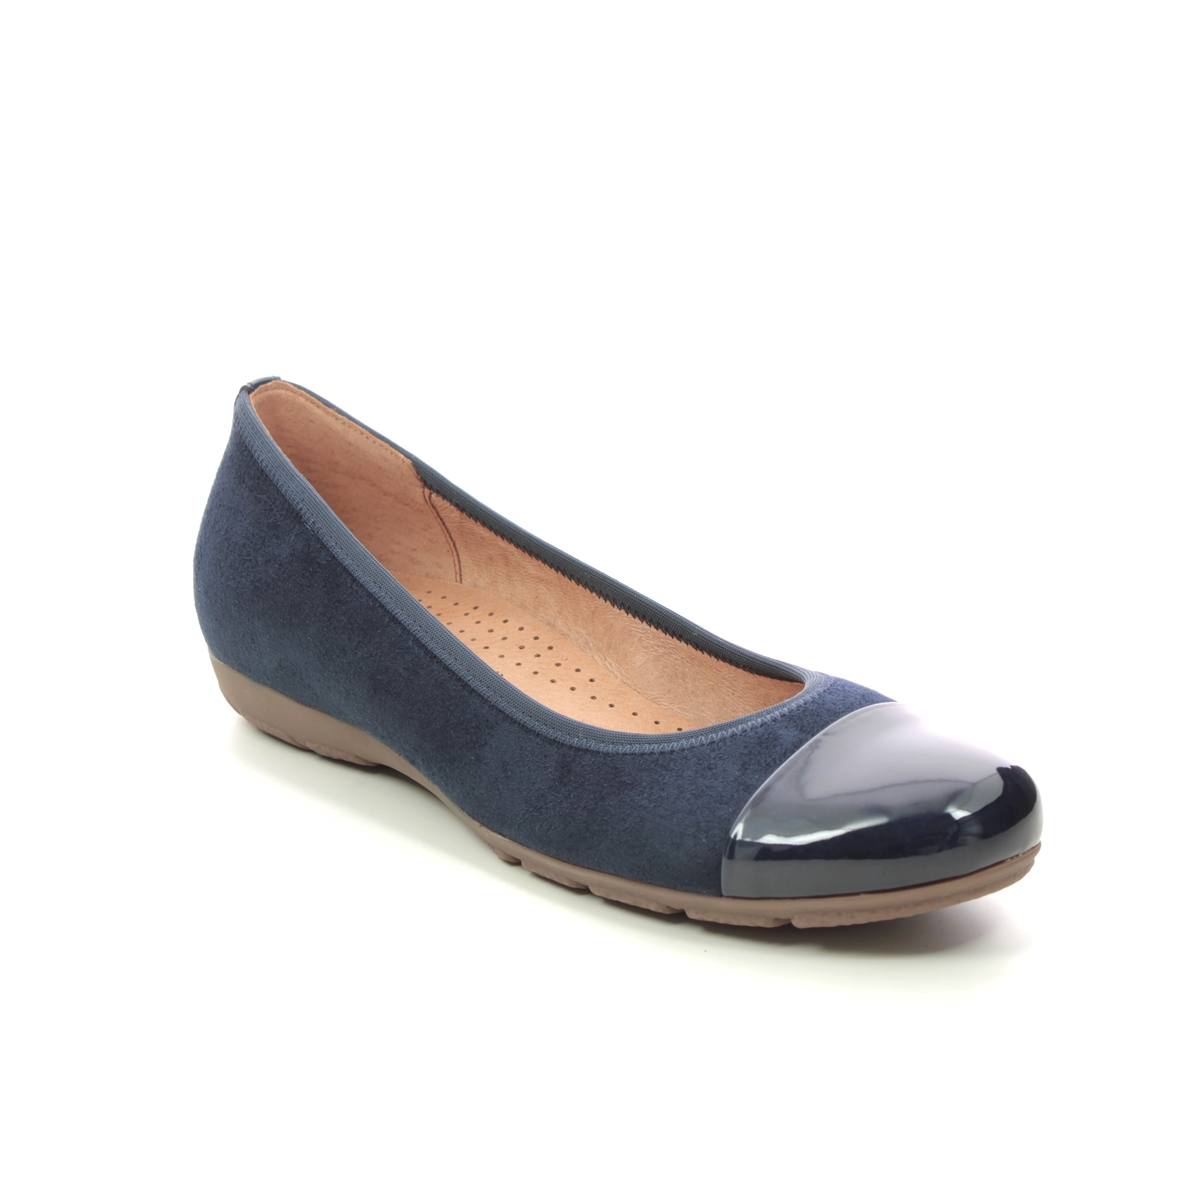 Gabor Raspa Navy Patent Nubuck Womens pumps 94.161.46 in a Plain Leather and Man-made in Size 7.5